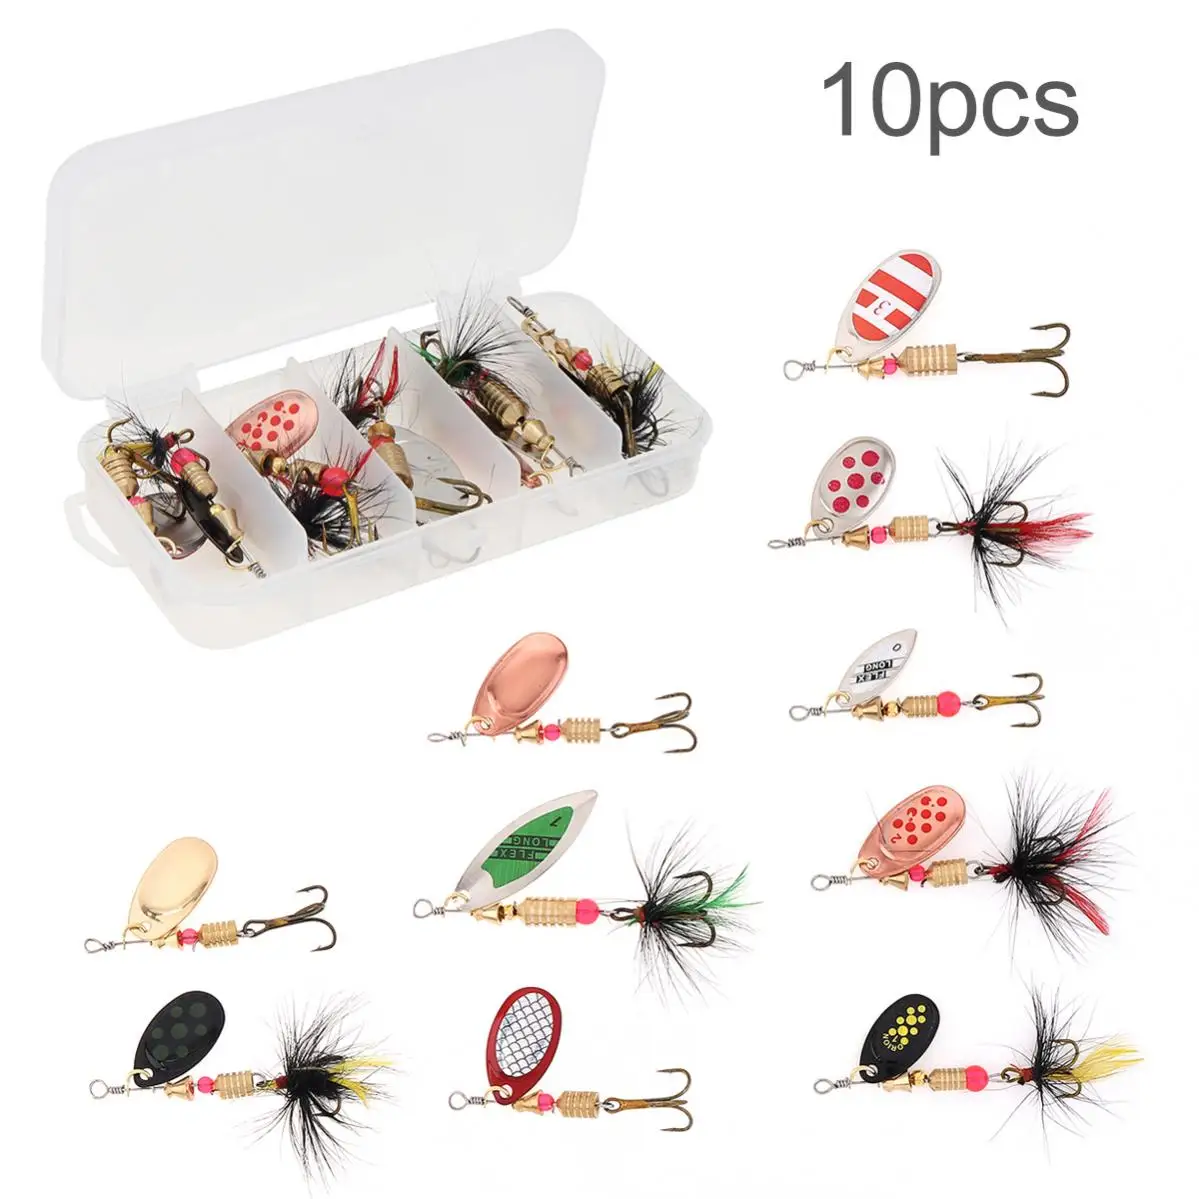 

10pcs/lot Fishing Spoon Baits 3g-7g Wobbler Metal Spinner Artificial Fishing Lures with Box Fishing Tackle hard Bait